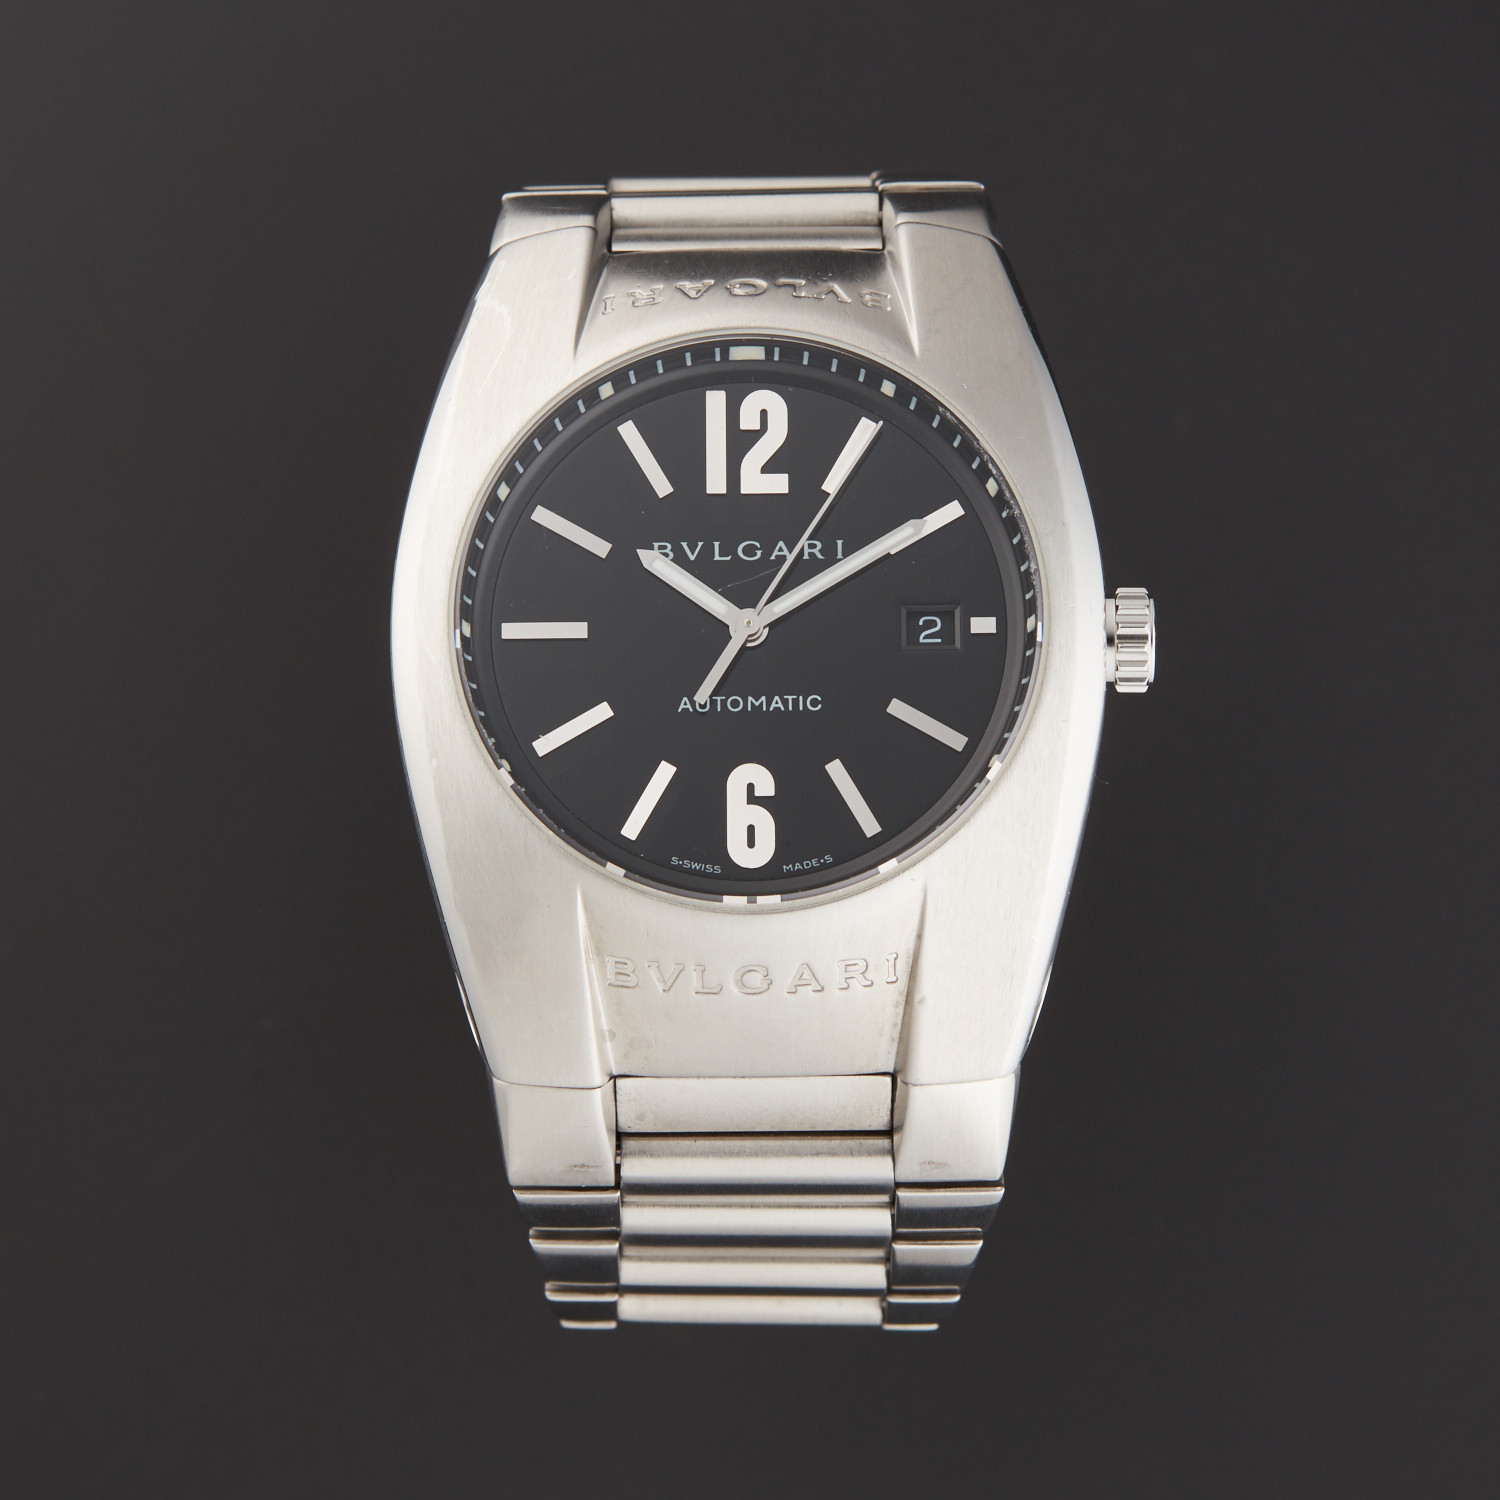 Bvlgari Ergon Automatic // EG 40 S // Pre-Owned - The finest Swiss